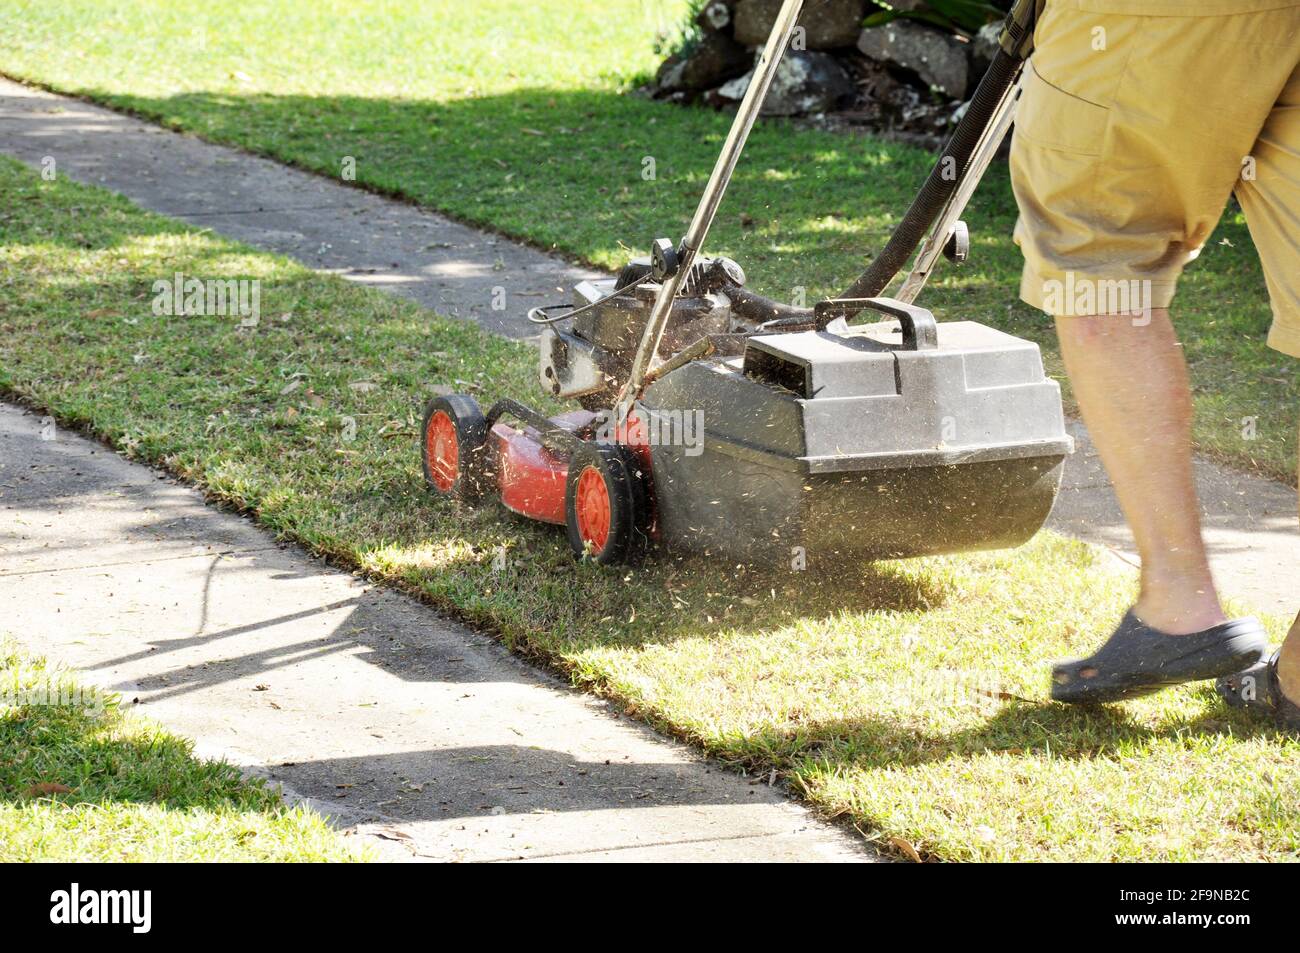 A man mowing lawn with lawn mower in the garden Stock Photo